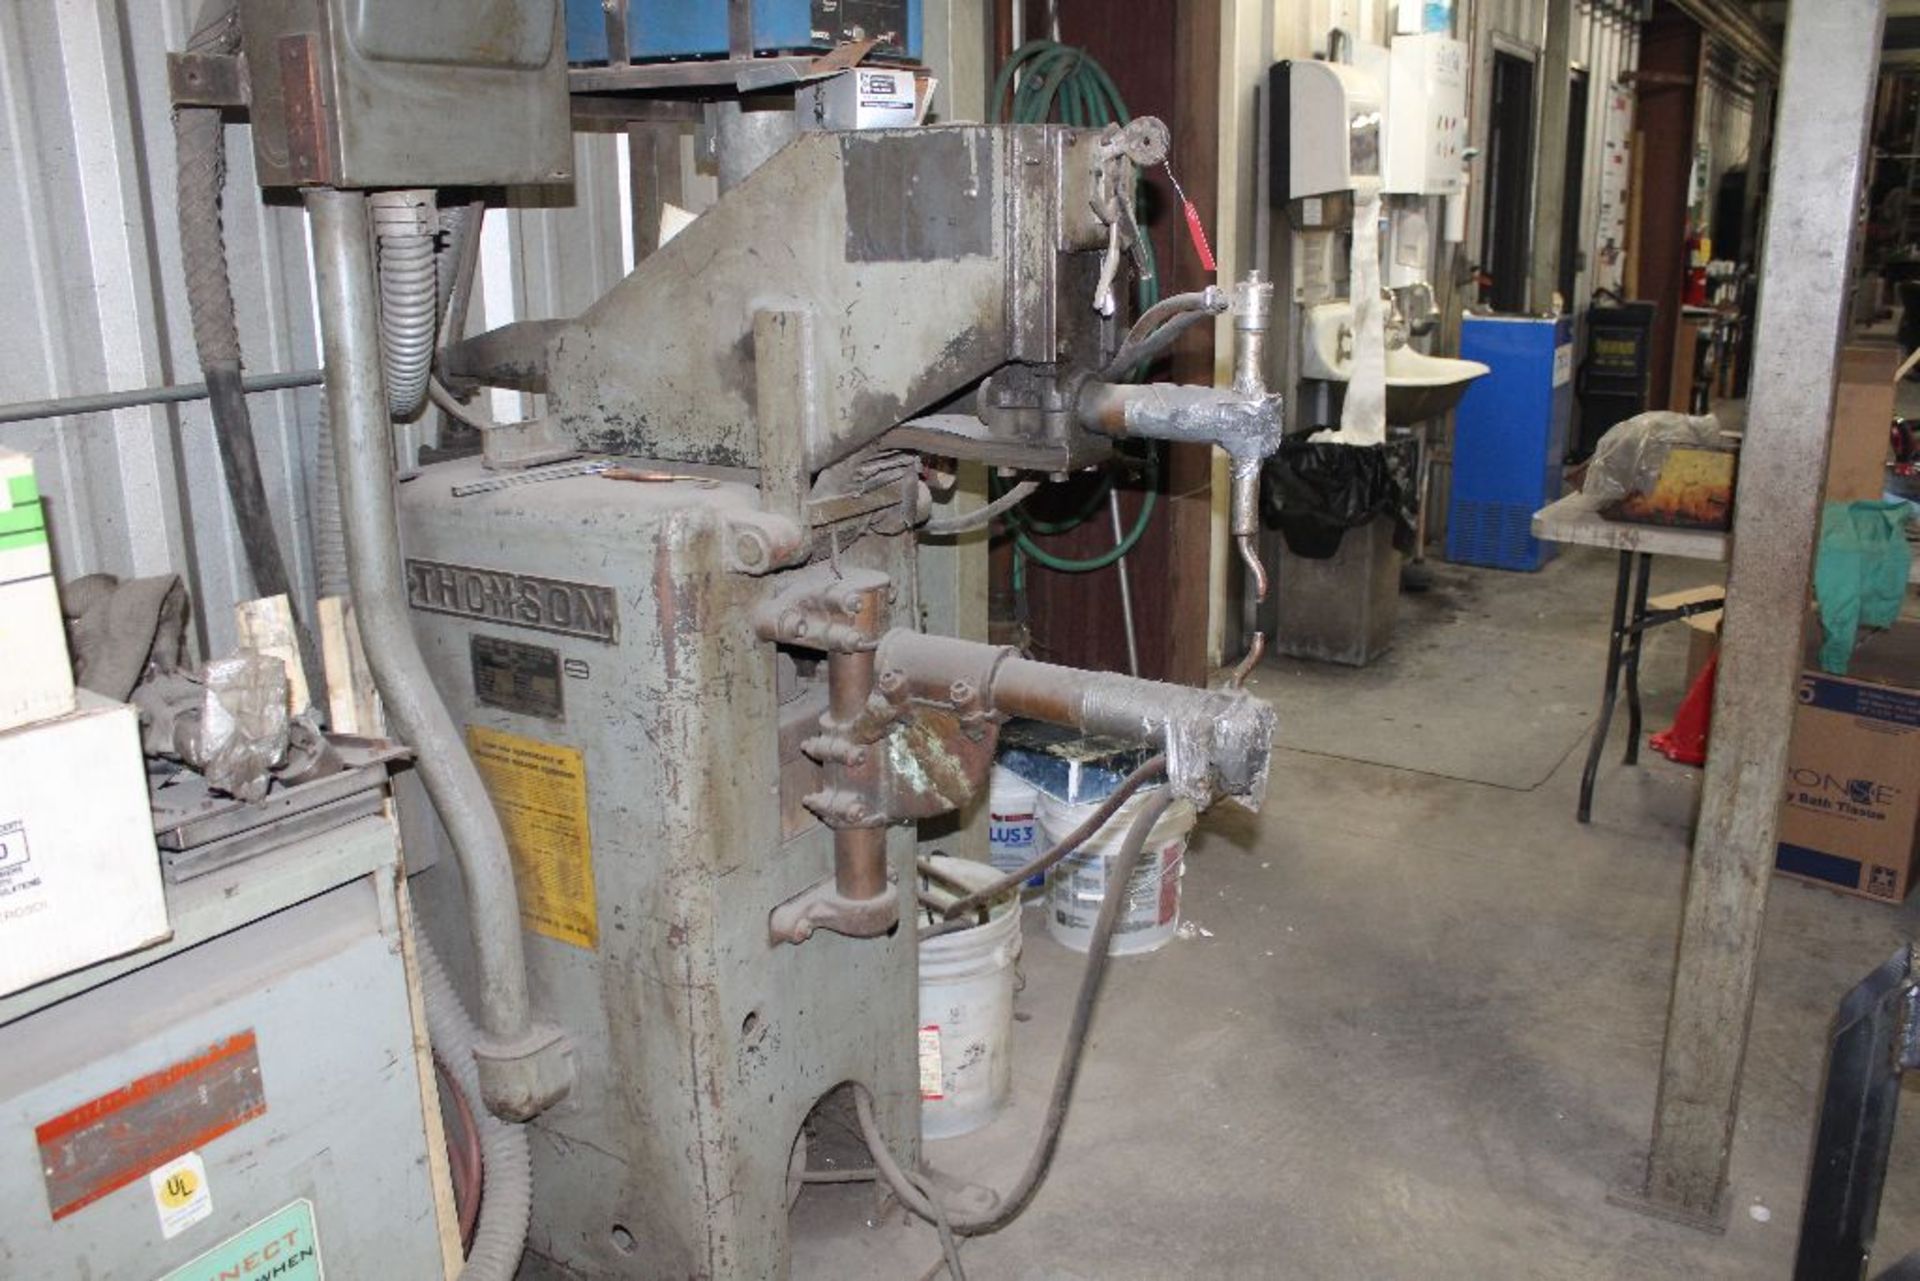 Thomson spot welder, model G-12, sn 15516, water cooled, updated controls. - Image 5 of 8